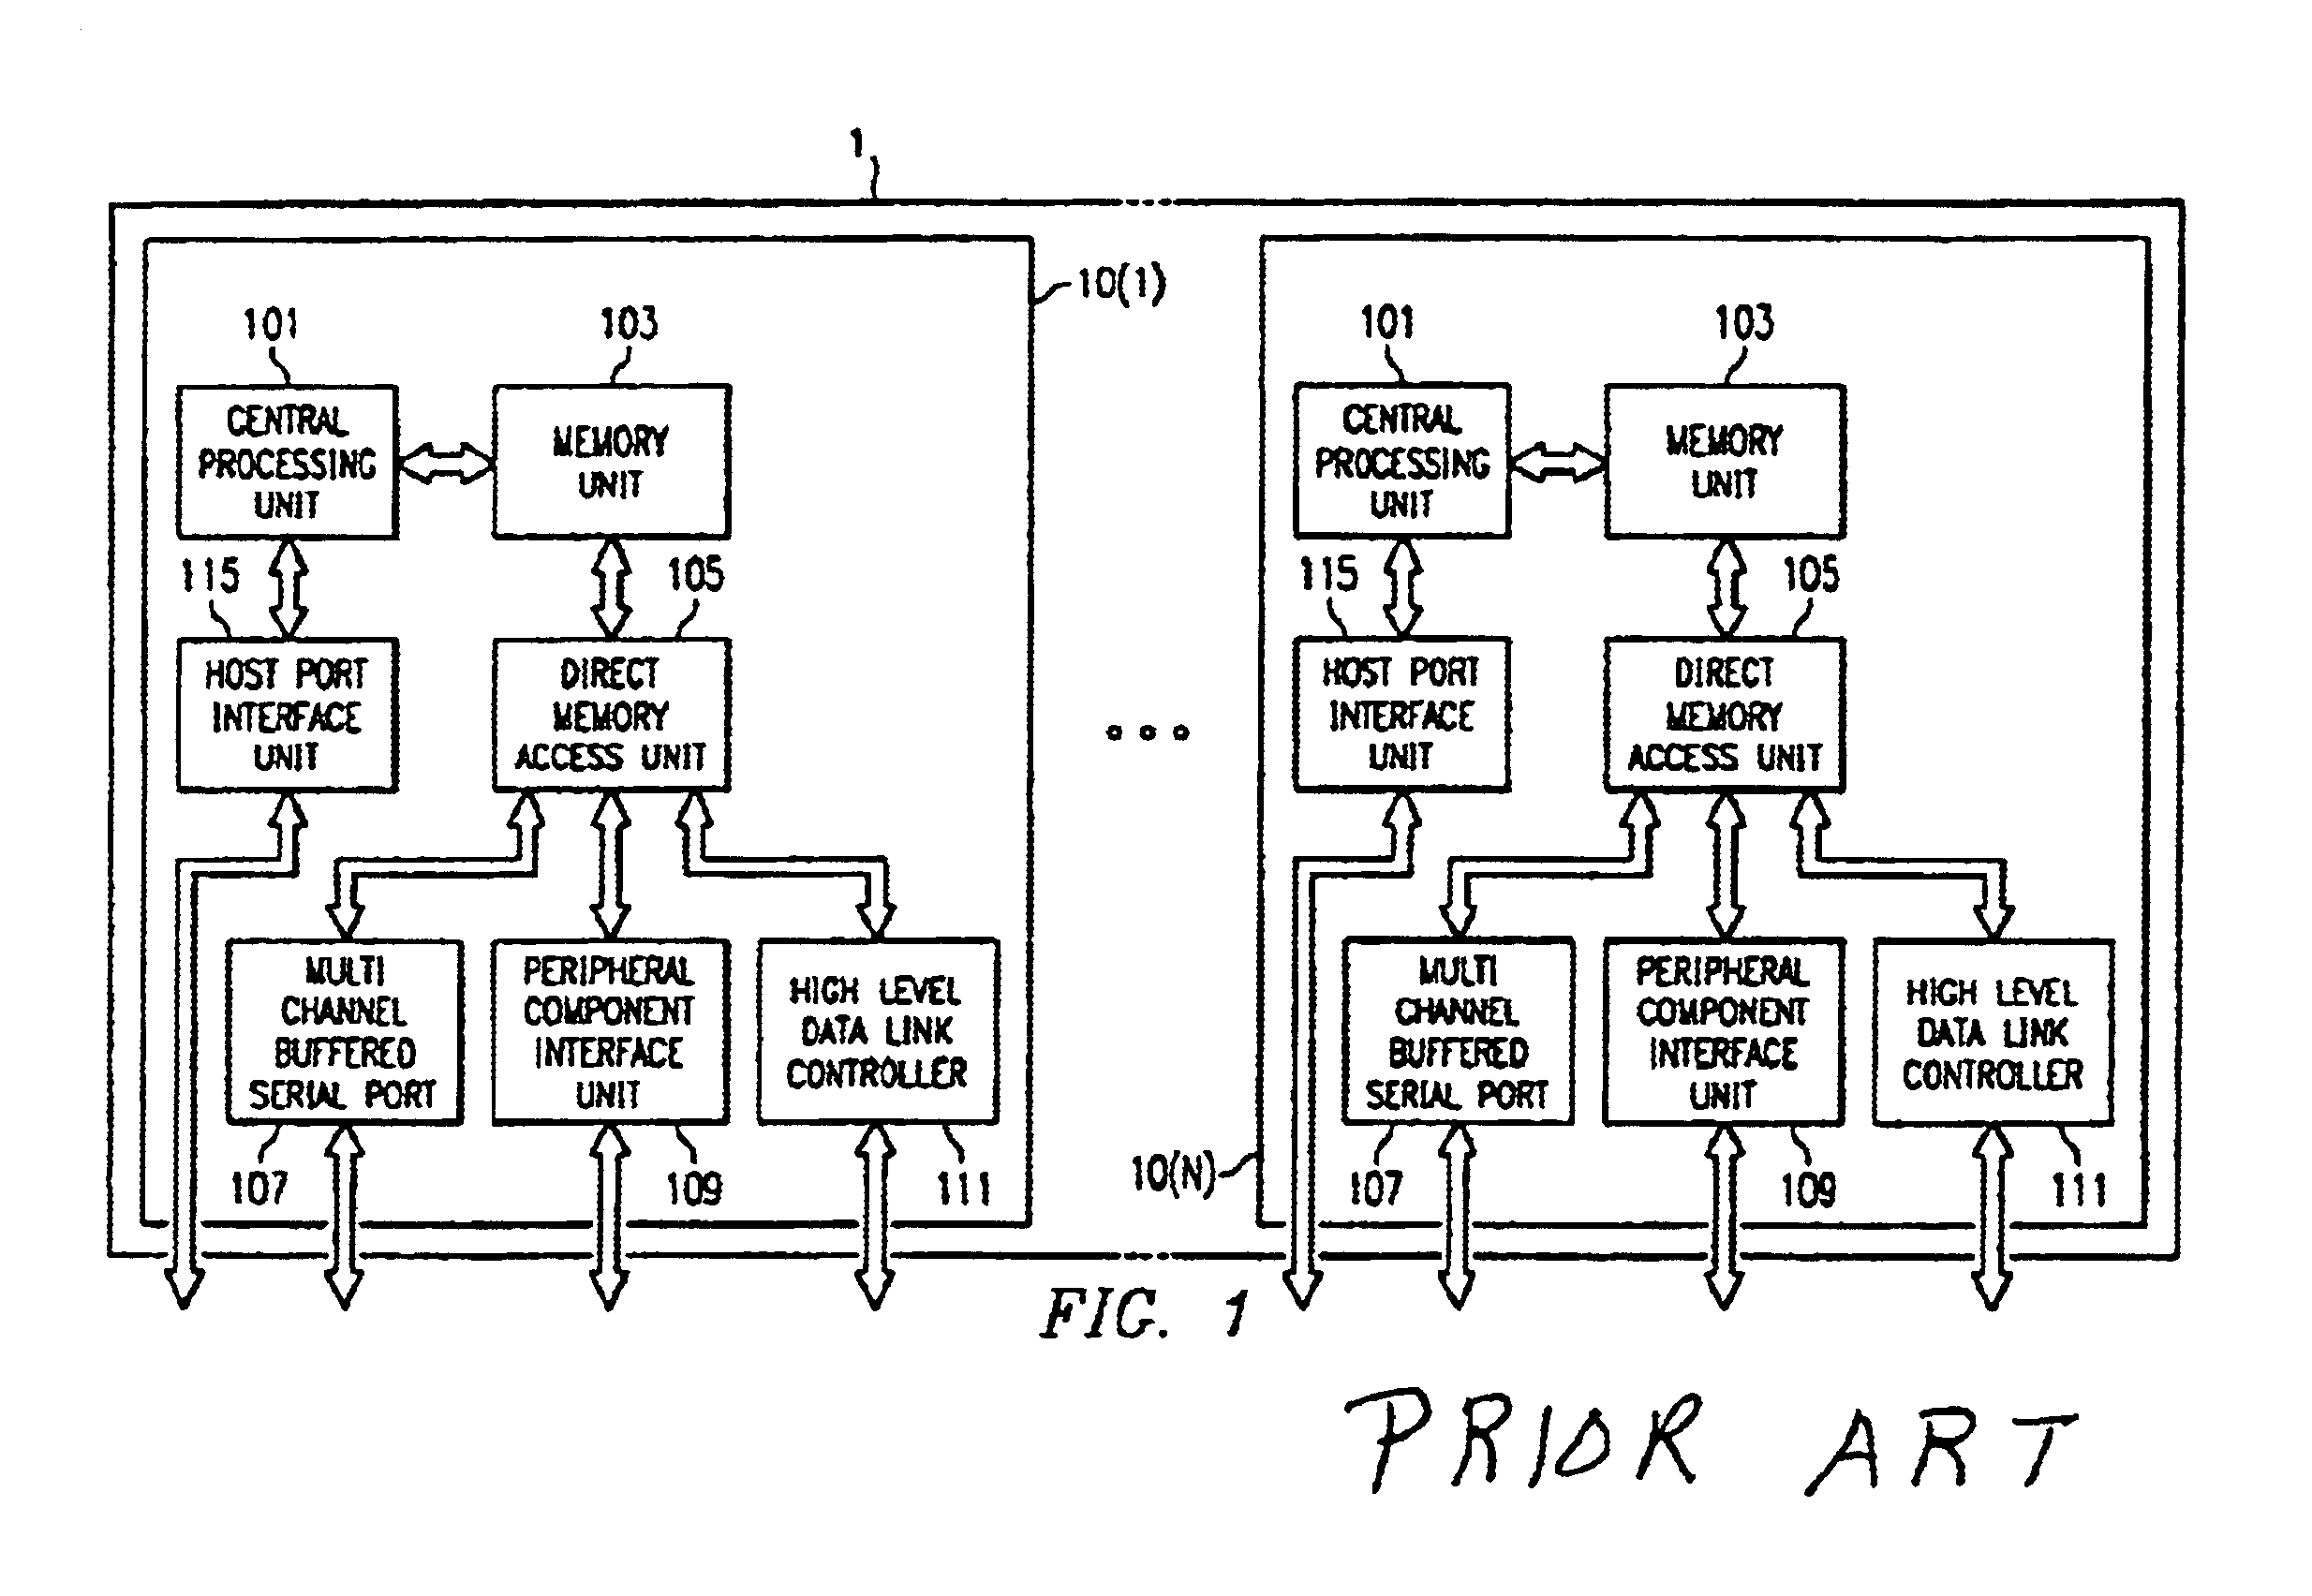 Apparatus and method for distribution of signals from a high level data link controller to multiple digital signal processor cores